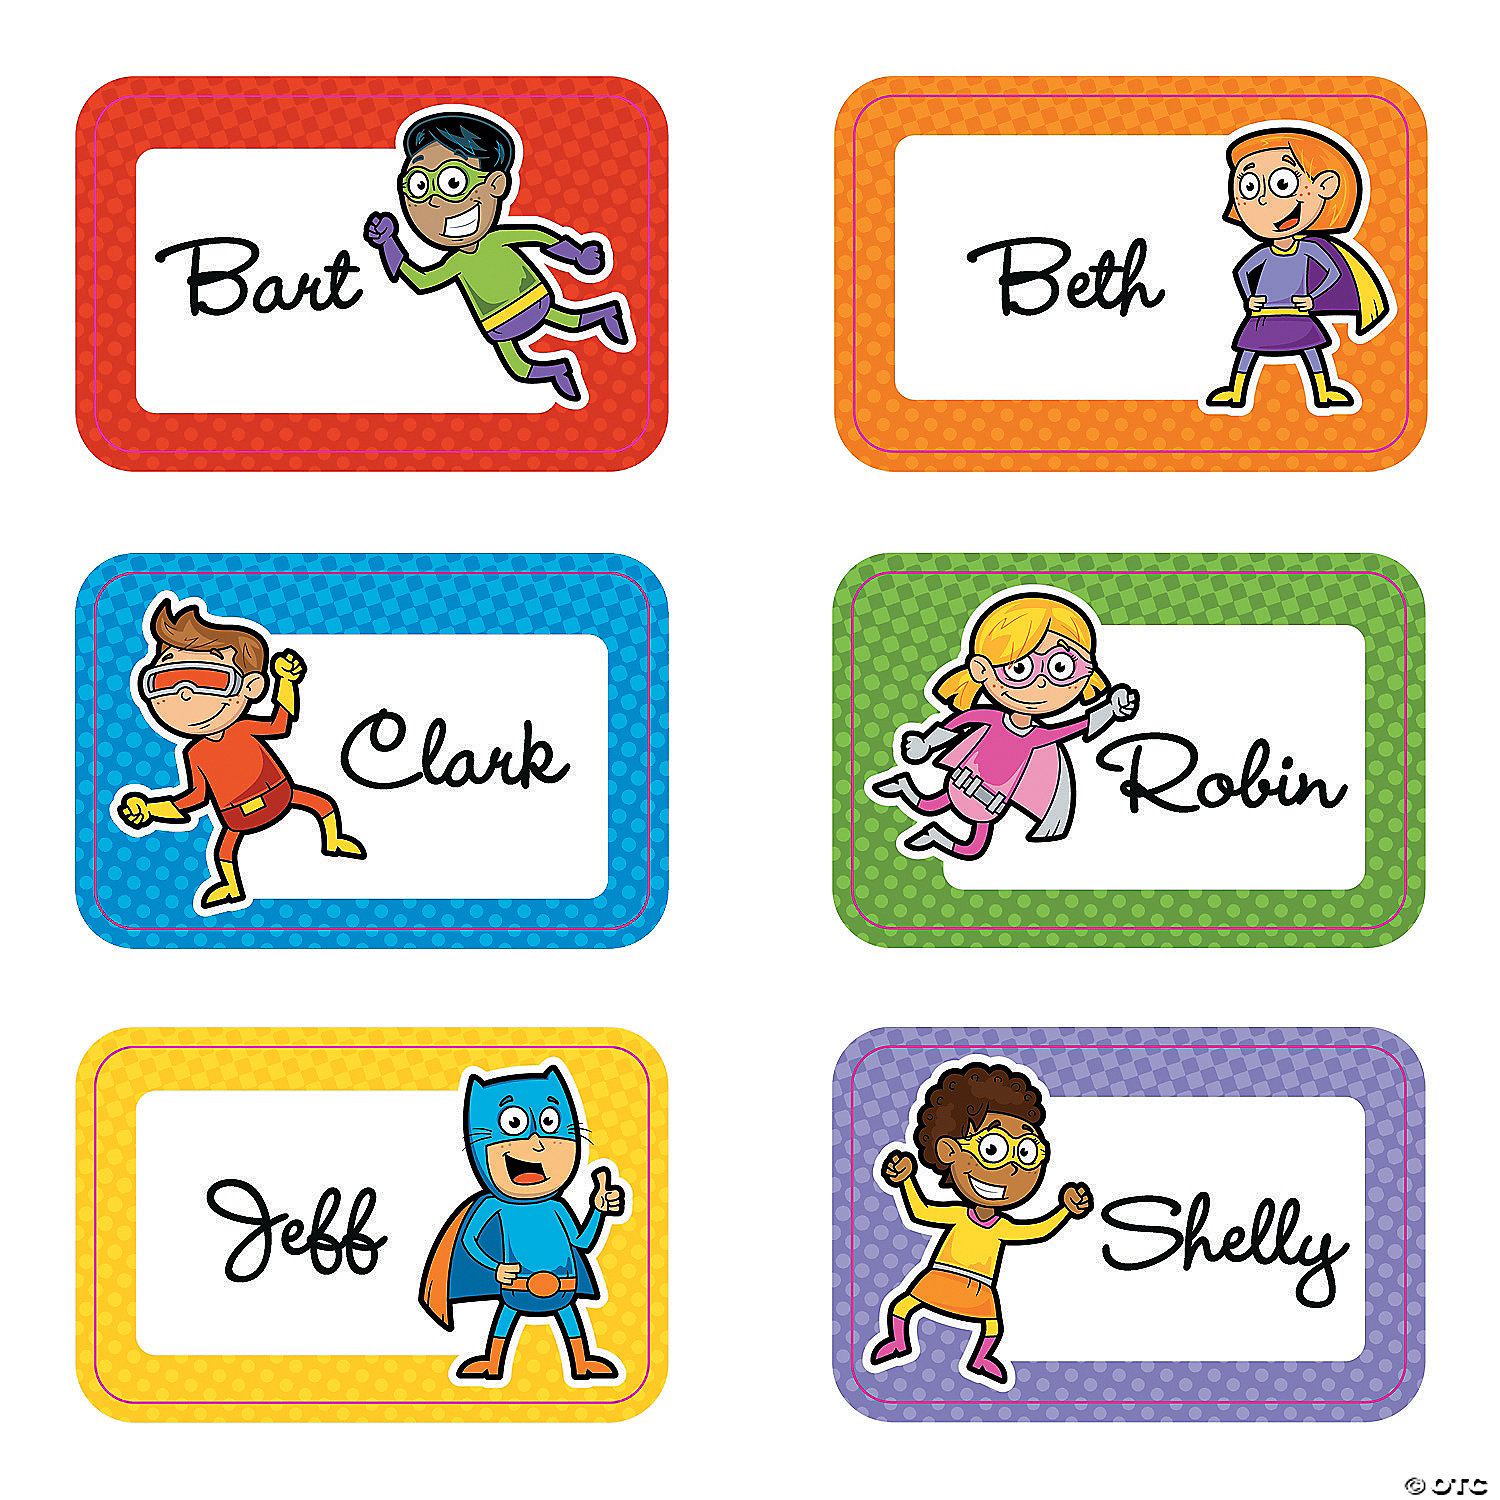 100 Superhero Name Tag Stickers for Kids 10 Designs 9 x 6.5 cm Comic Book Name Label Sticker Badges Students and Teachers use